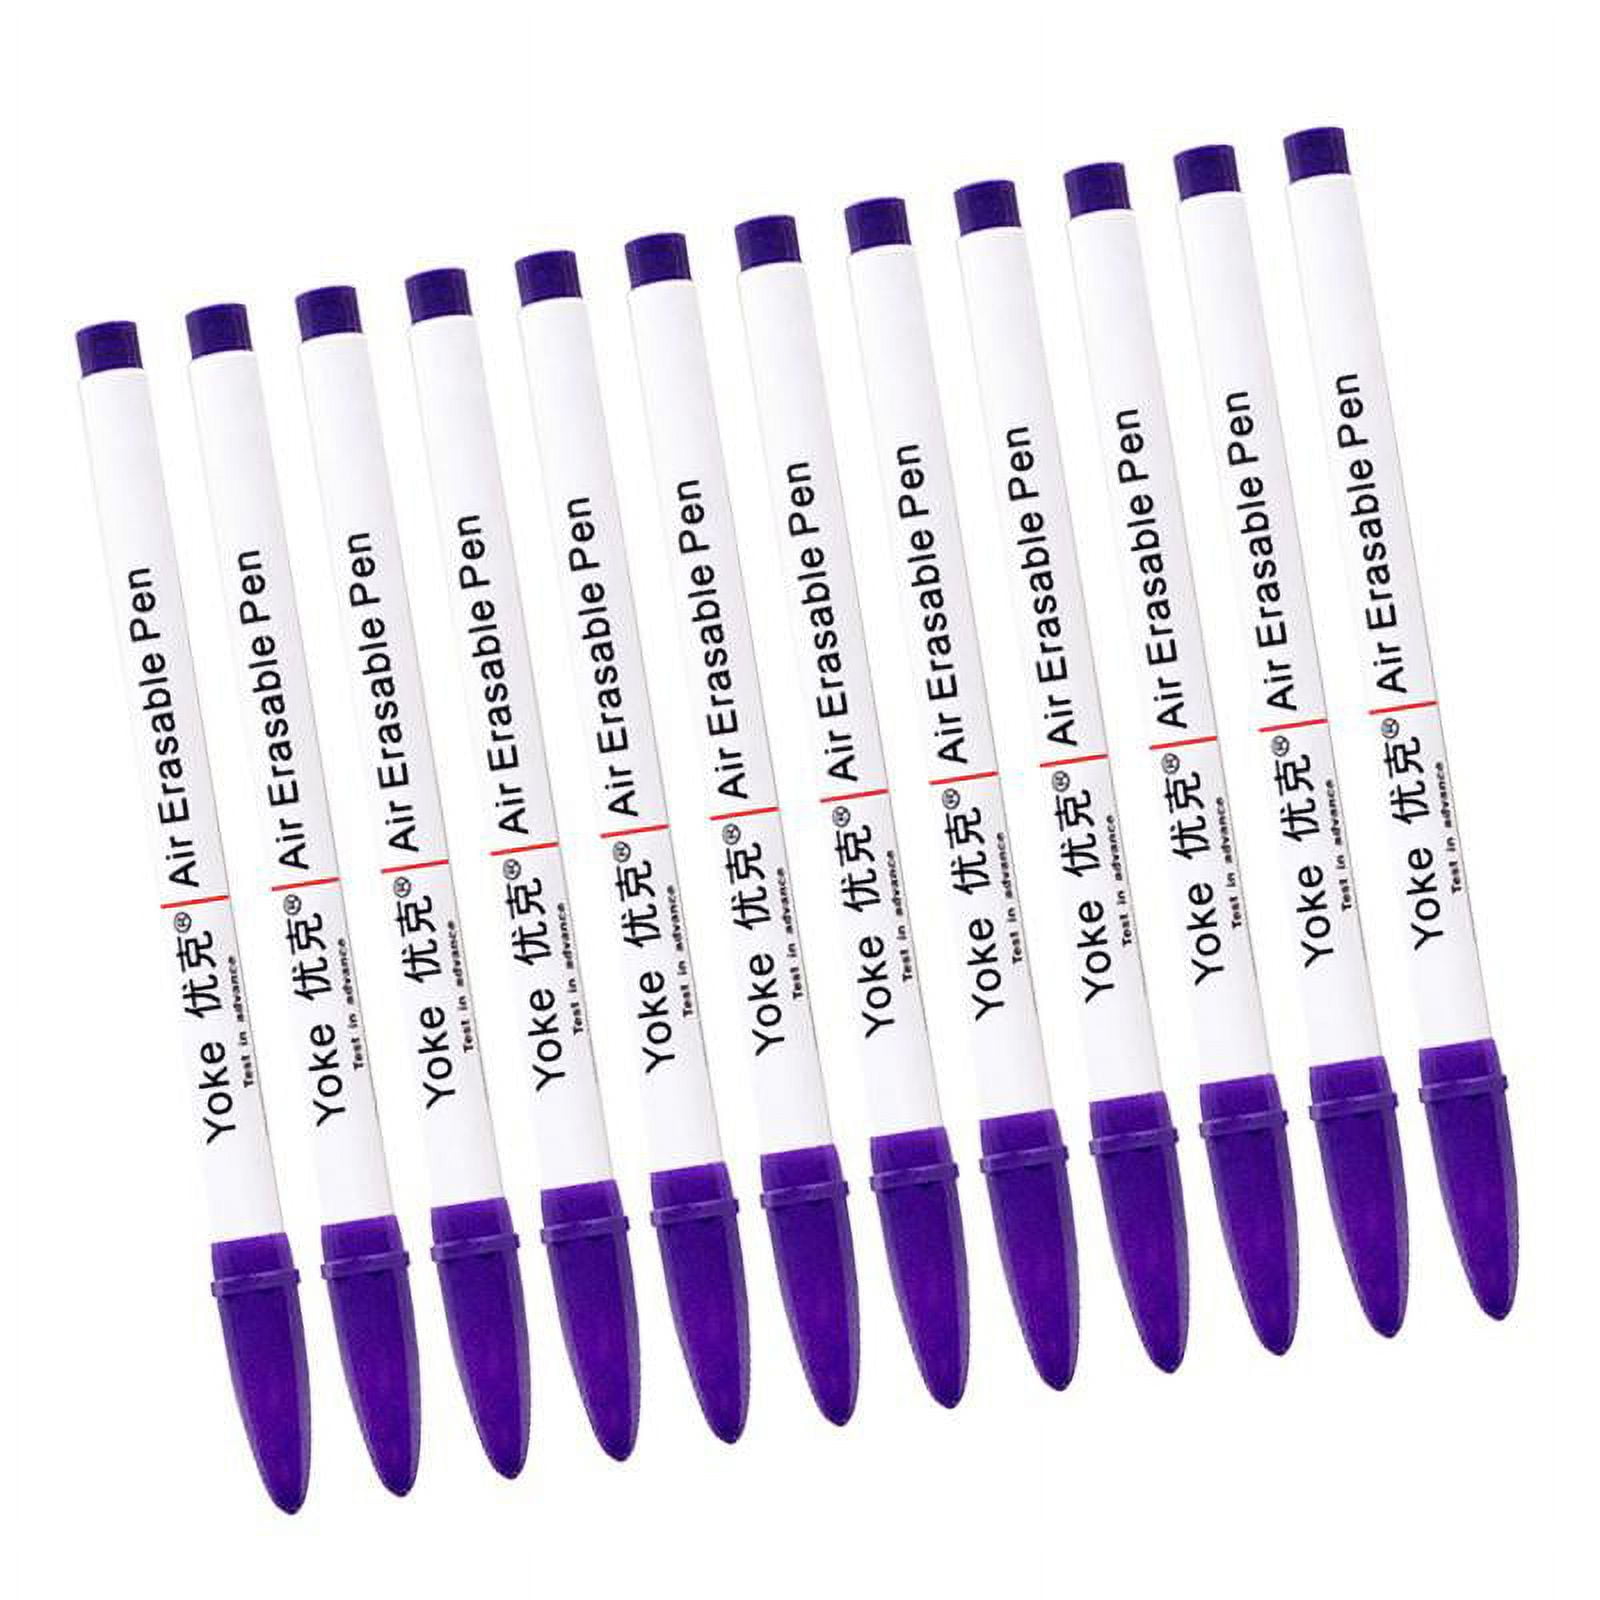 12 PACK Disappearing Ink Marking Pen, Air Water Erasable Pen/ Fabric  Marker/ Temporary Marking/ Auto-Vanishing Pen for Cloth (Purple)